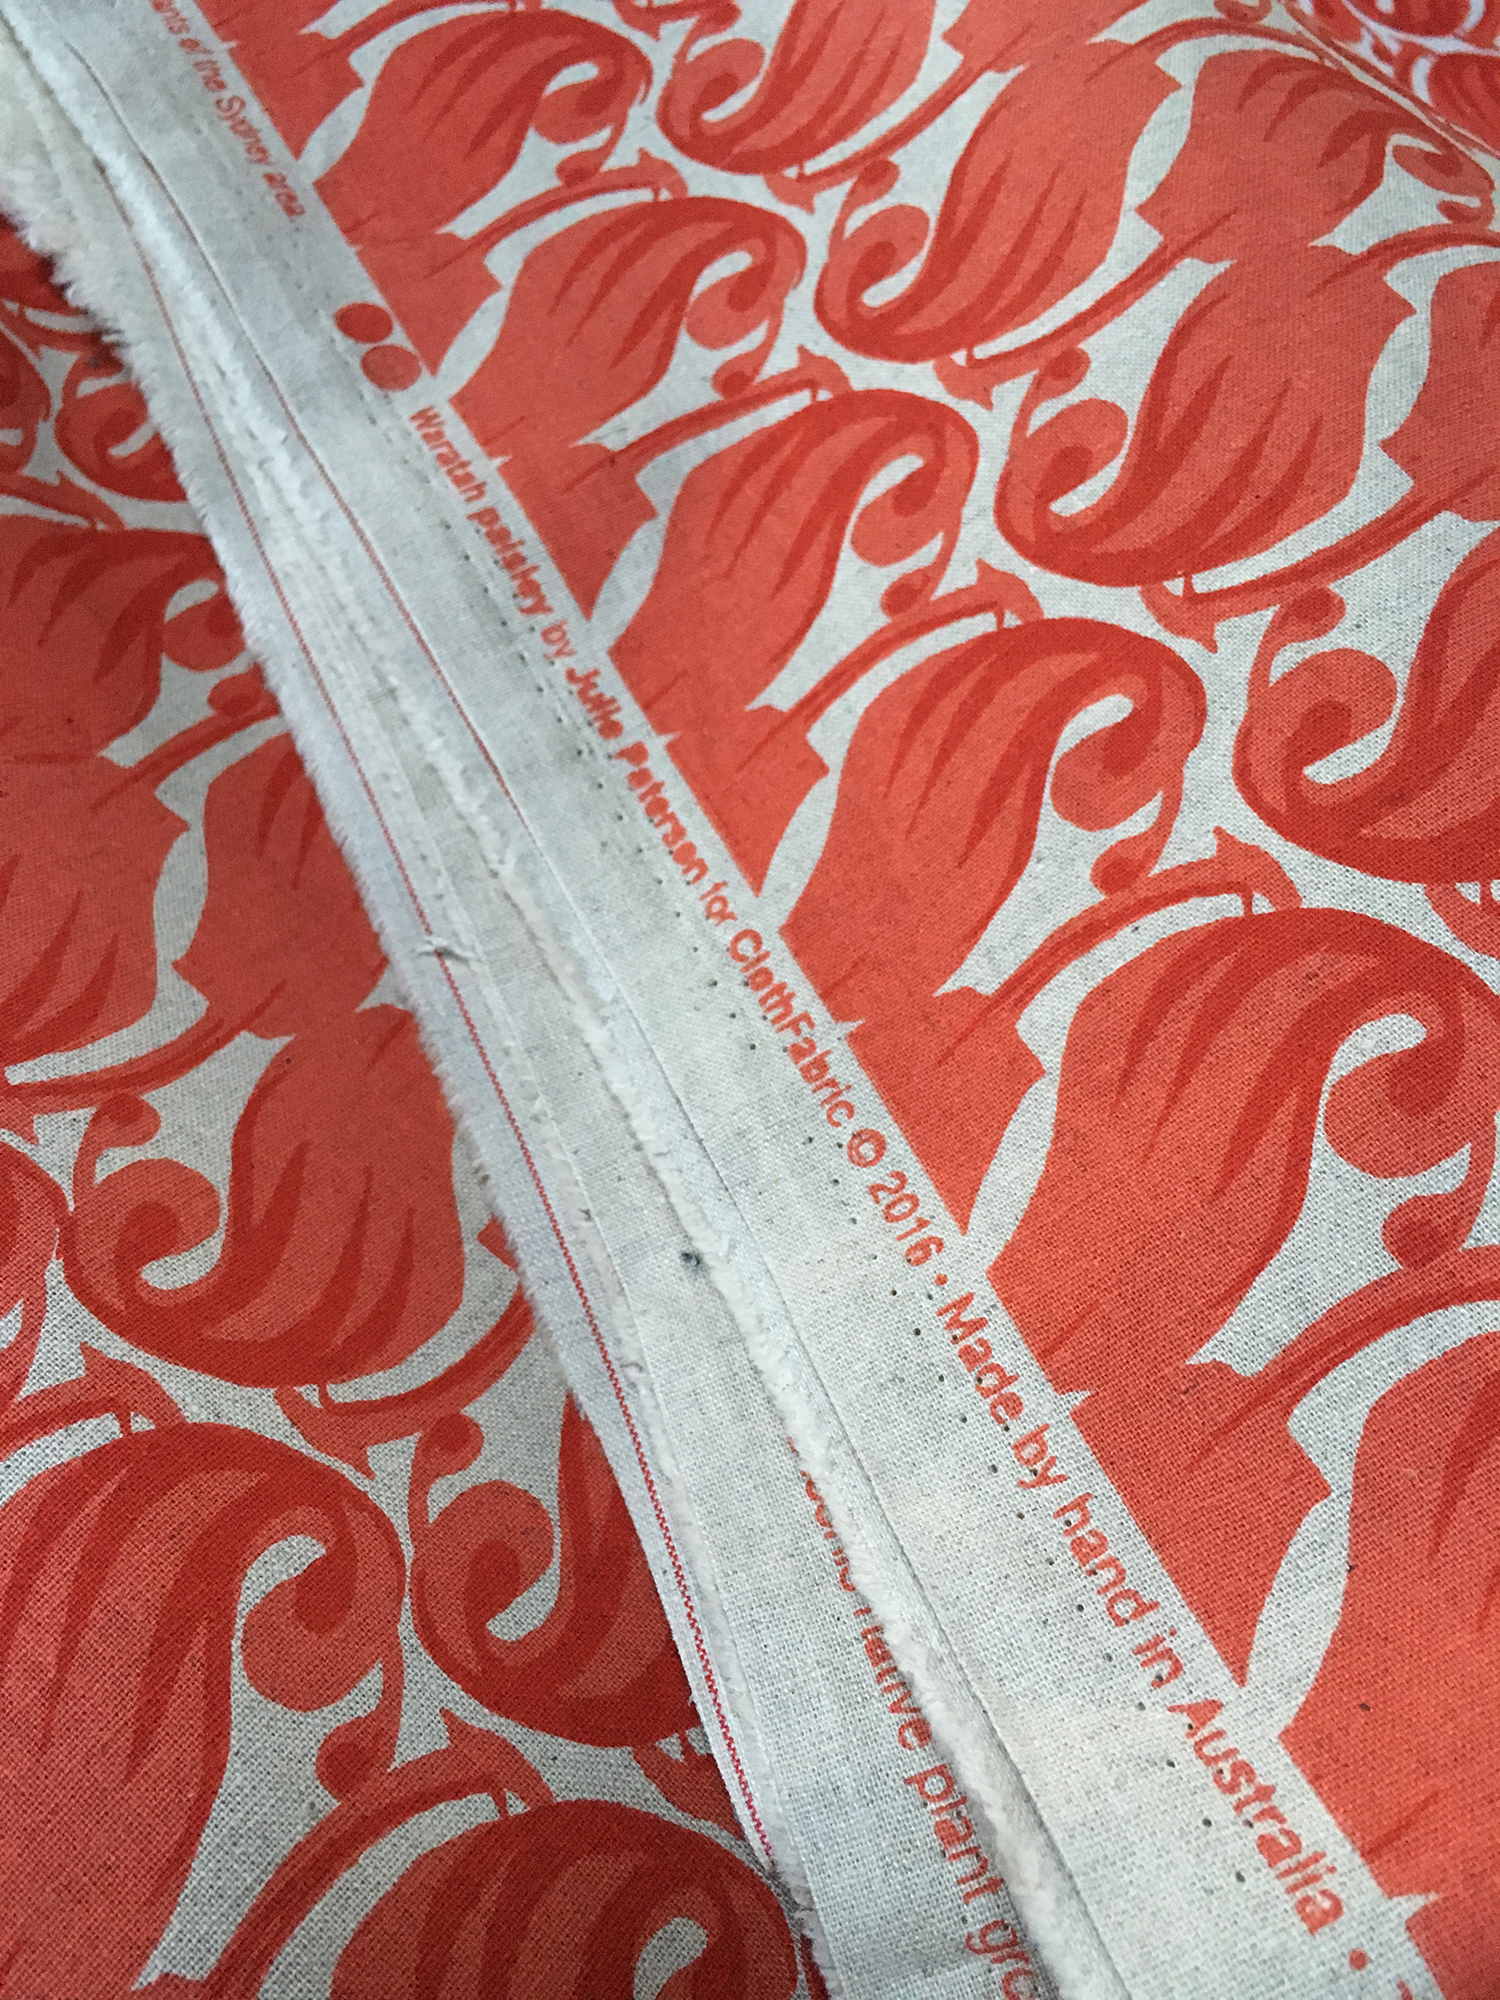 edge of piece of fabric with red print of waratah bud